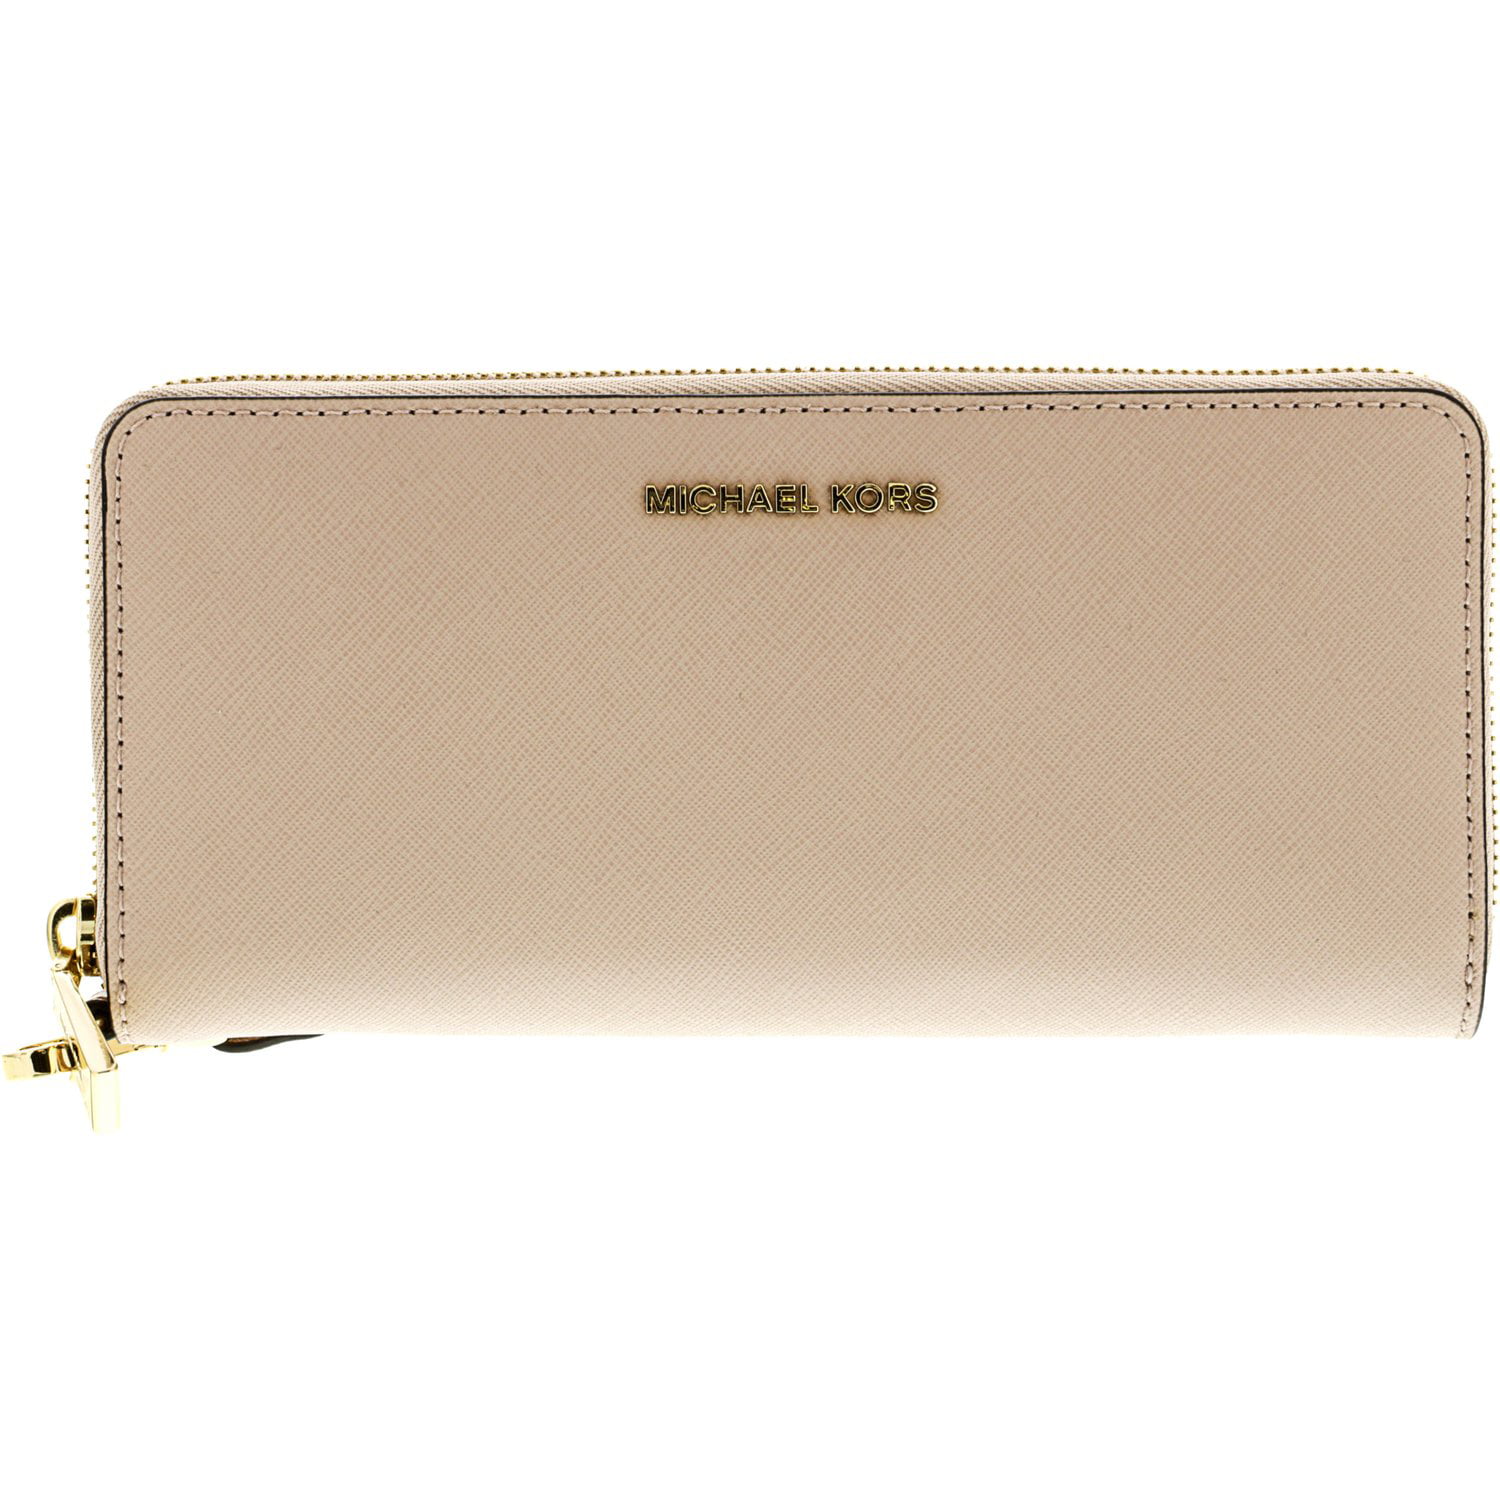 michael kors leather continental wallet